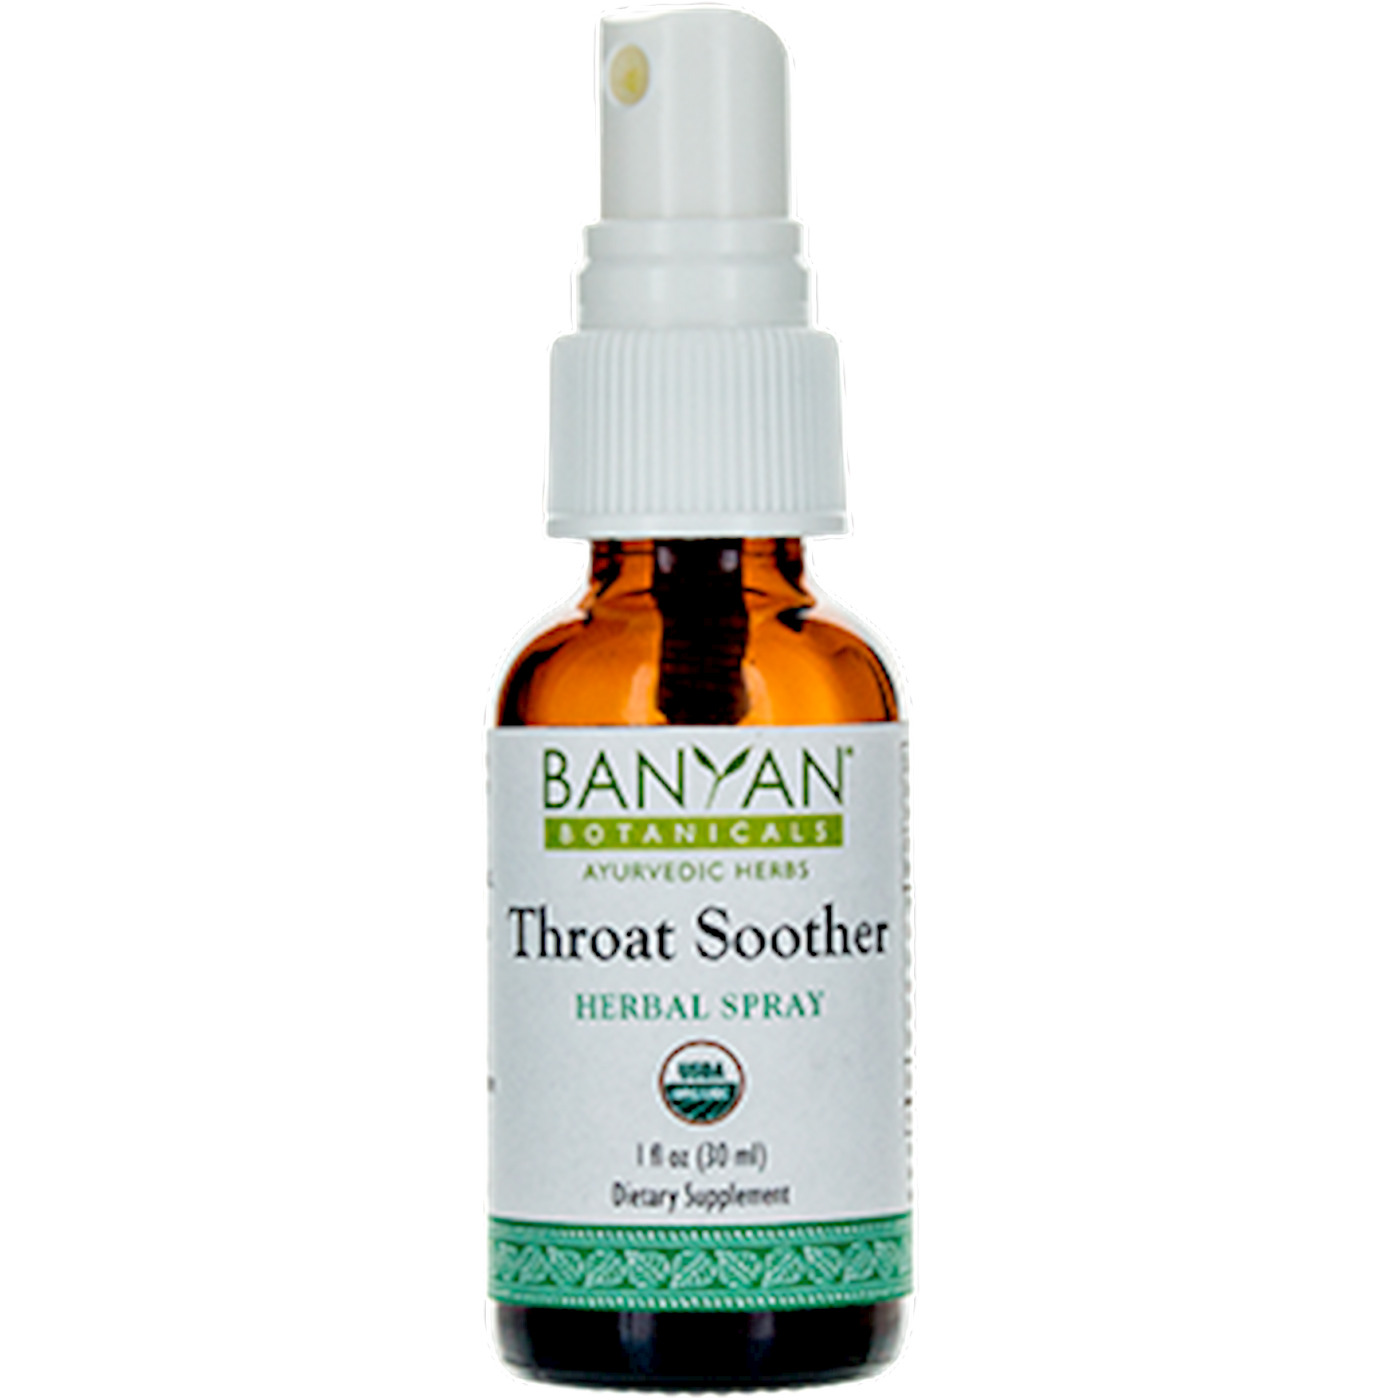 Throat Soother Spray, Organic 1 fl oz Curated Wellness